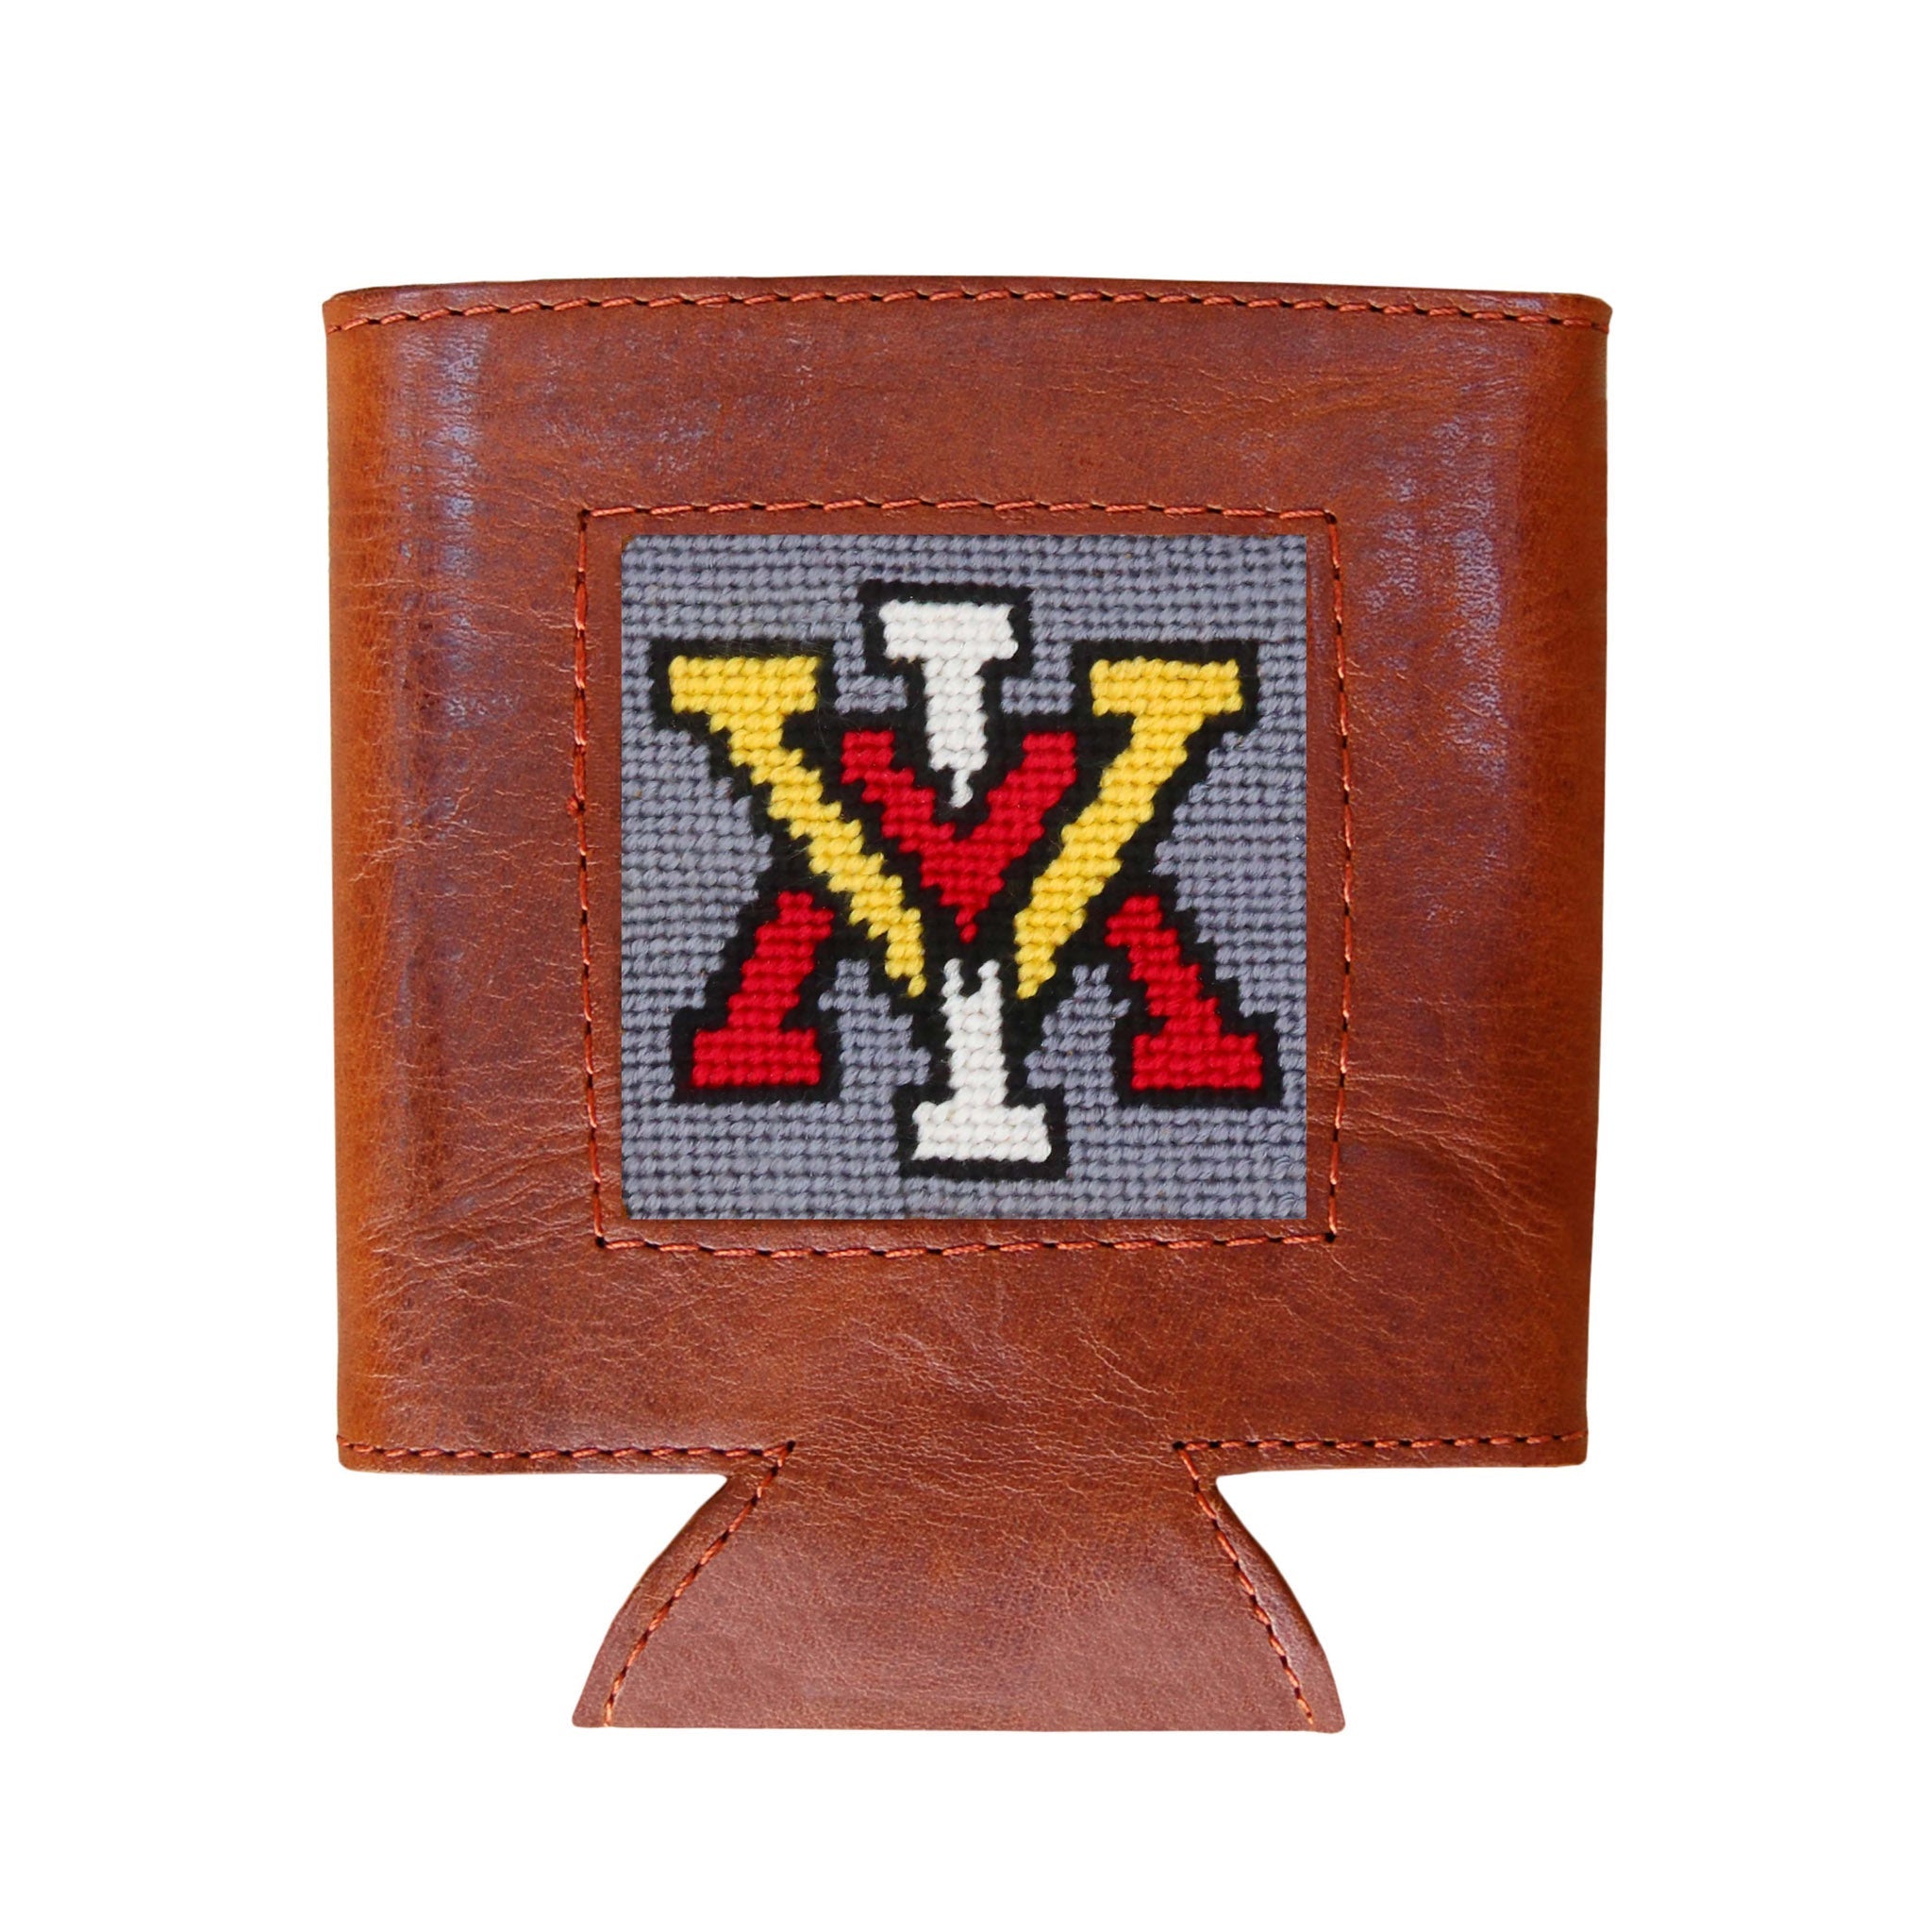 Smathers and Branson VMI Needlepoint Can Cooler   